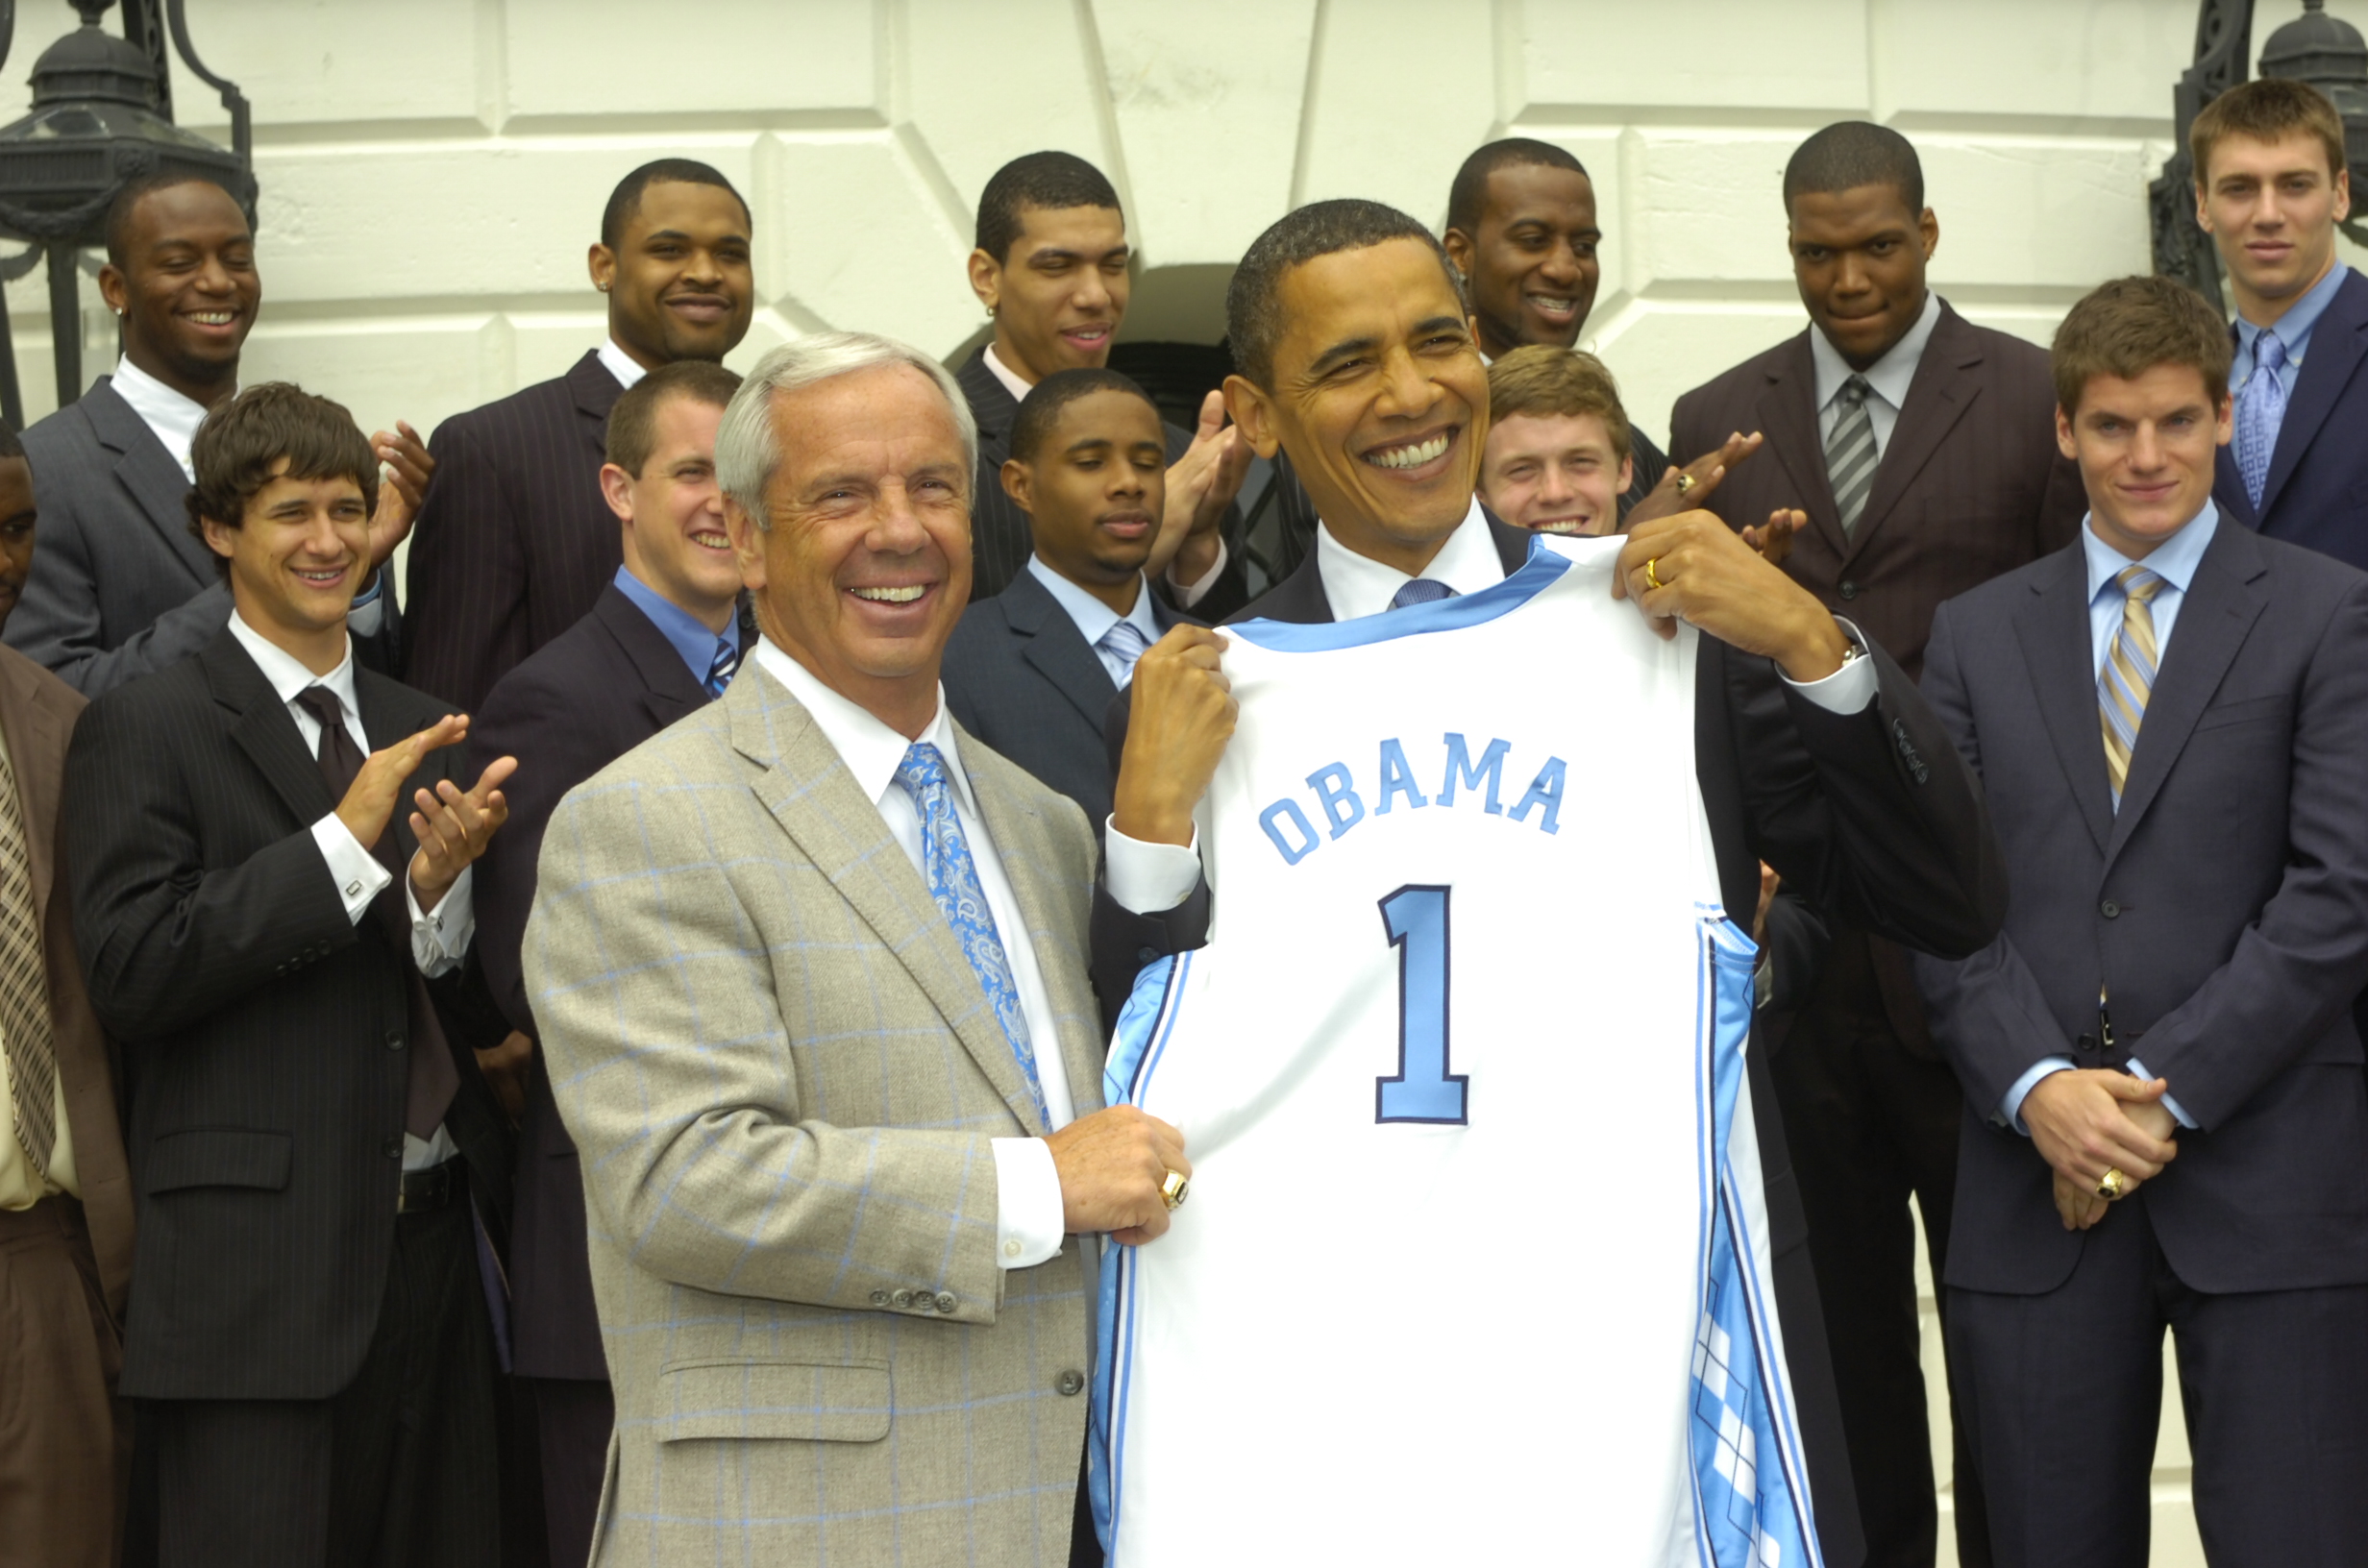 Roy Williams presenting President Barack Obama a Carolina jersey with the number 1 and the name Obama.